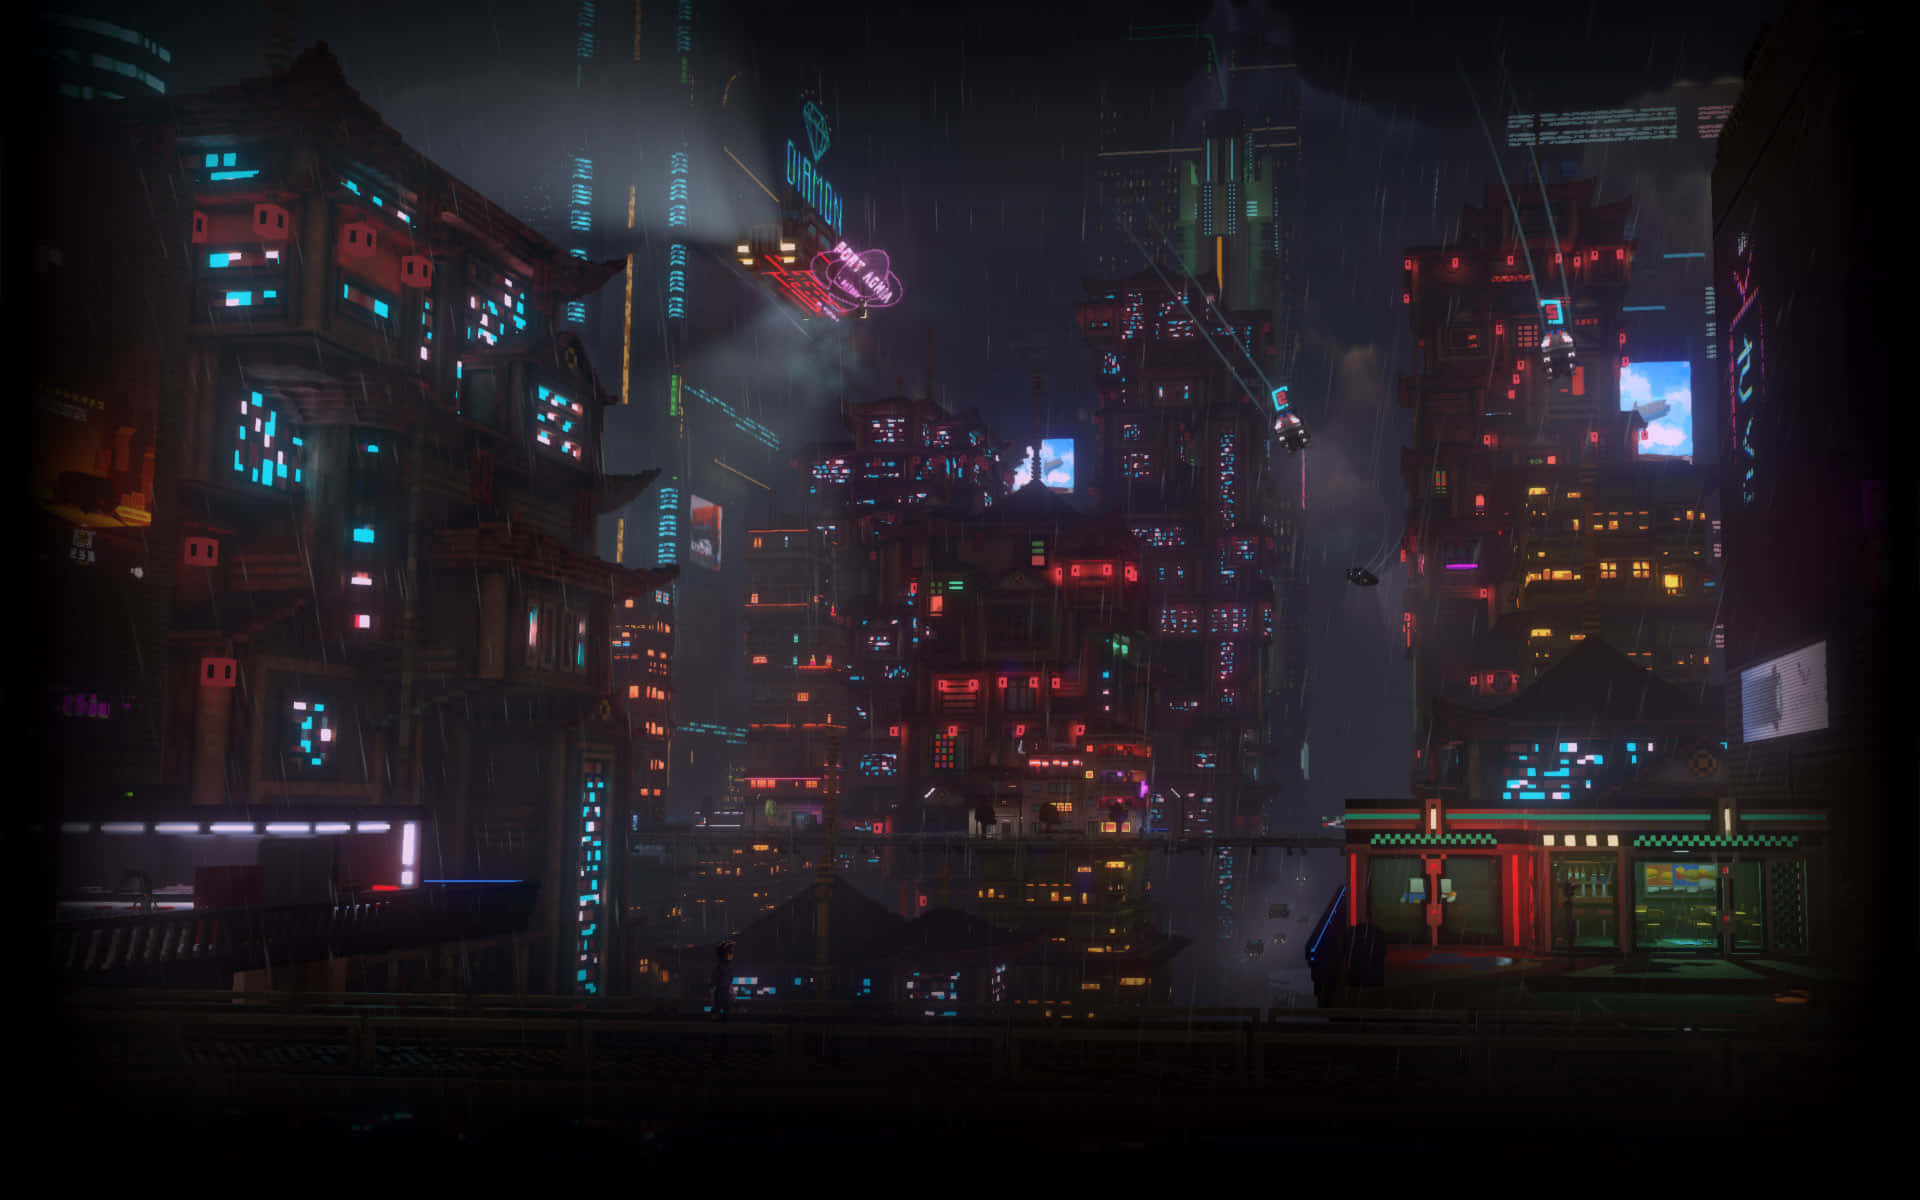 A City With Neon Lights And Buildings